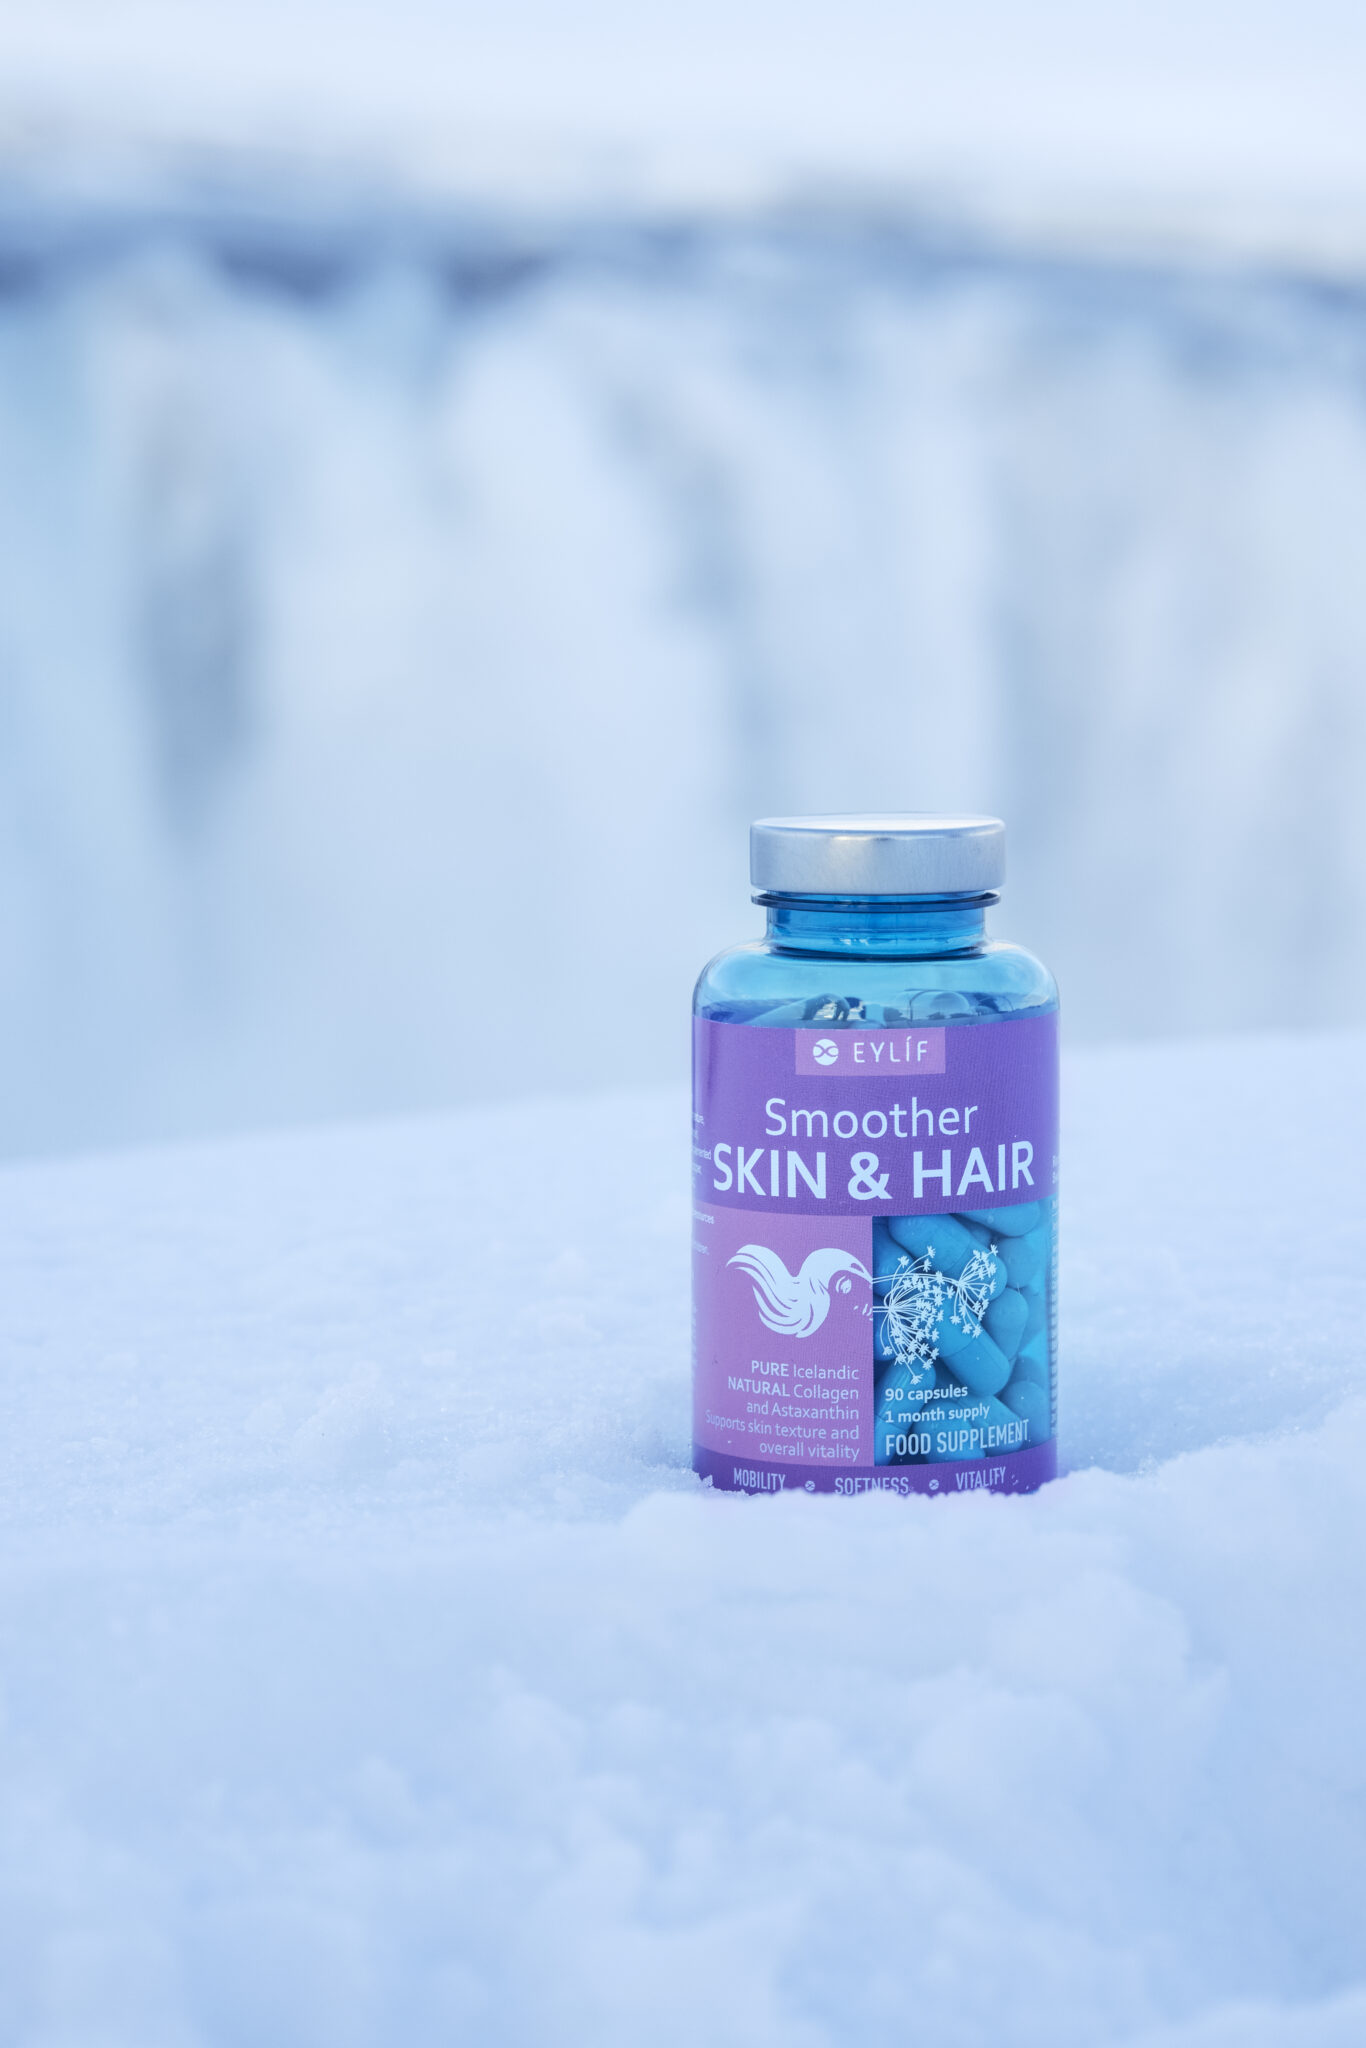 Smoother SKIN & HAIR in winter